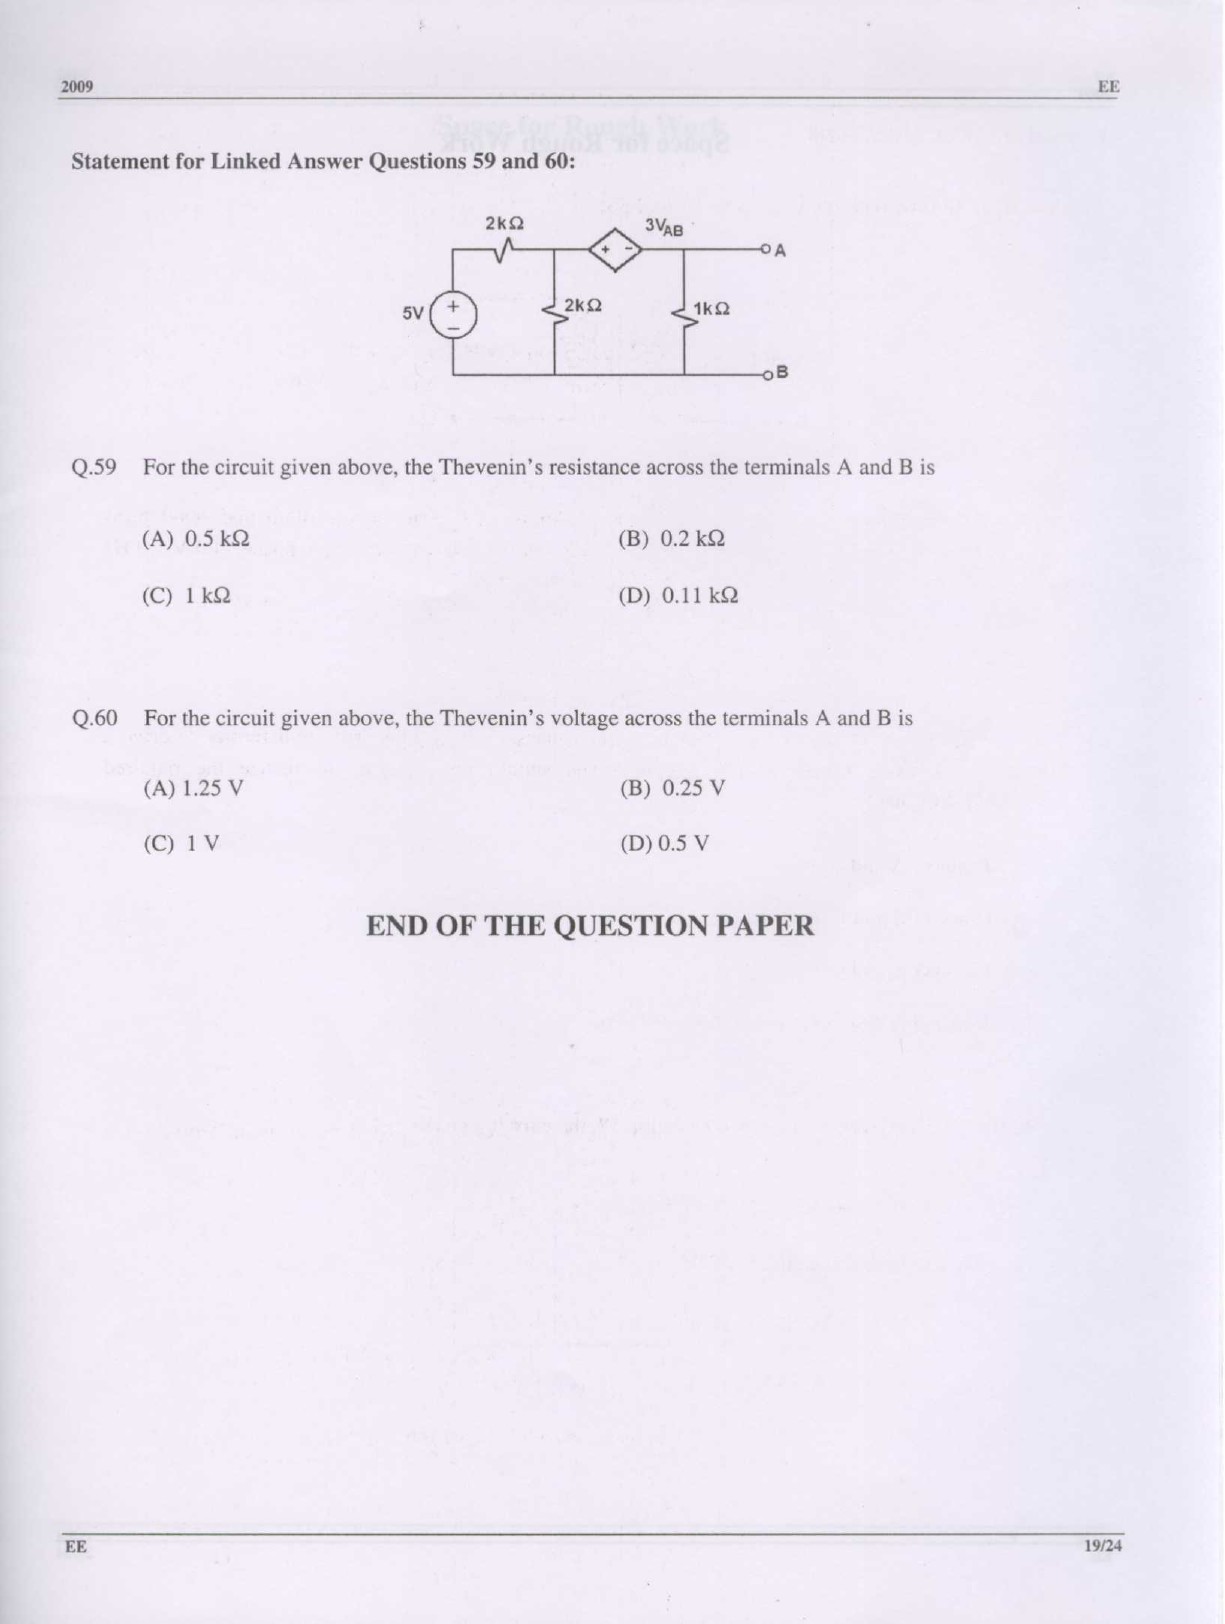 GATE Exam Question Paper 2009 Electrical Engineering 19